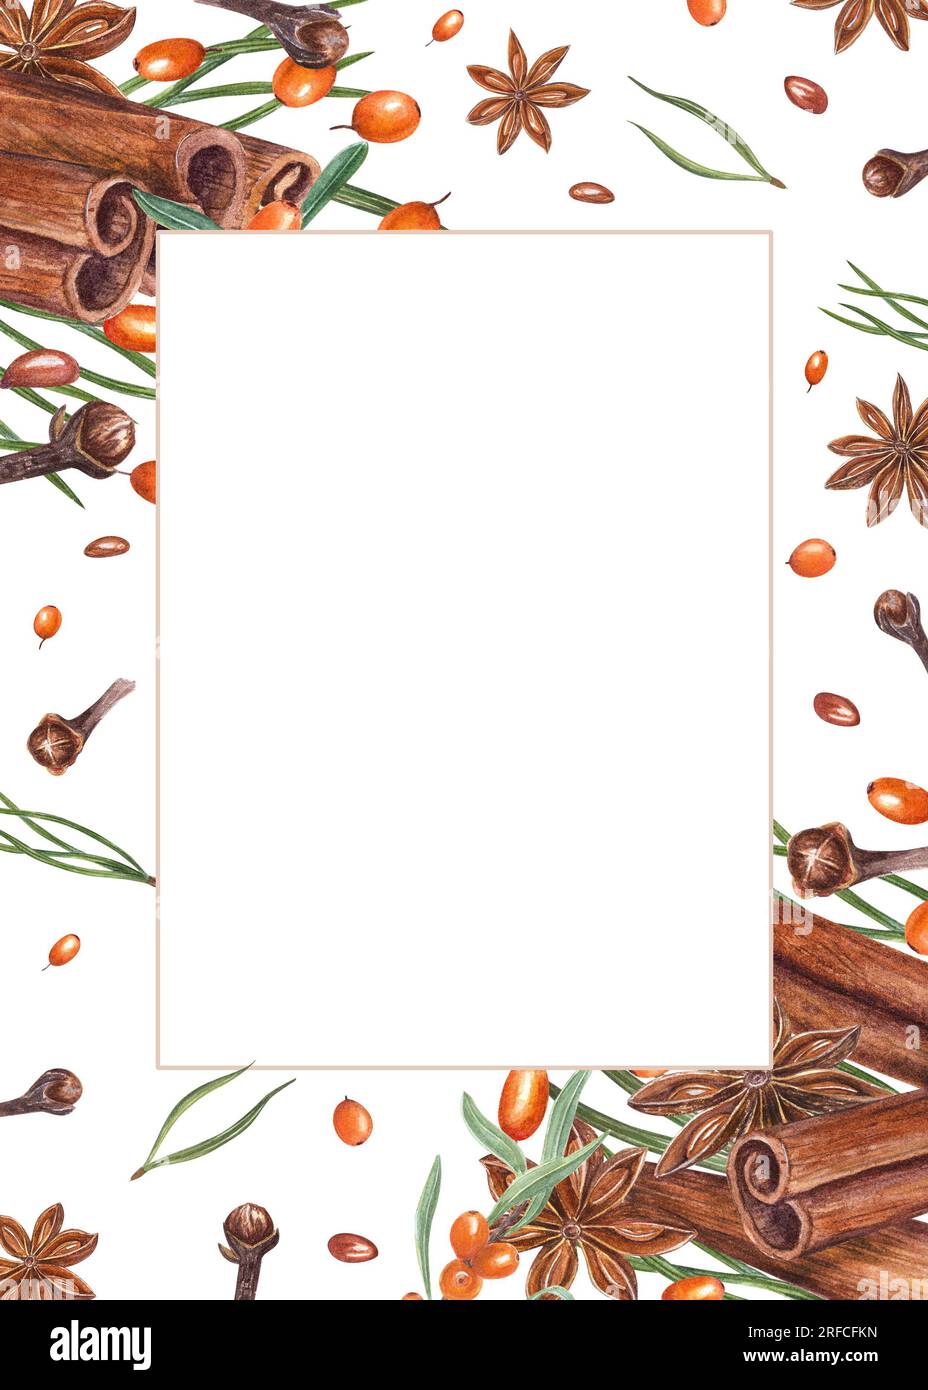 Watercolor cinnamons, star anise, sea buckthorn, pine needles, cloves. frame isolated on white. Orange berries, brown spices. Illustration Stock Photo